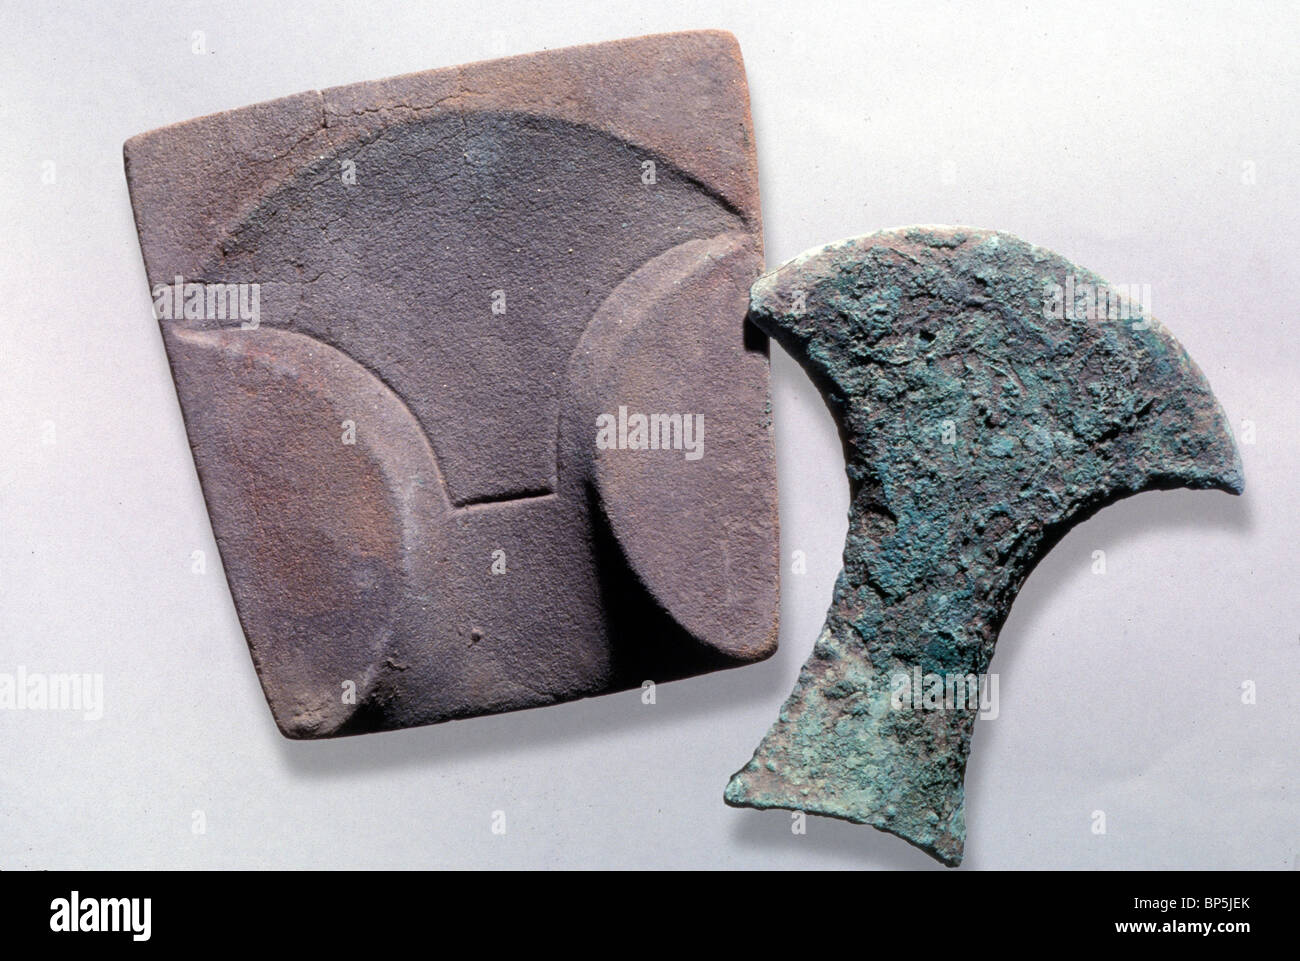 EGYPTIAN STYLE AX WITH THE STONE MOULD IN WHICH IT WAS CAST. THE REAR PORTION OF THIS TYPE OF AXE IS INSERTED INTO THE WOODEN Stock Photo